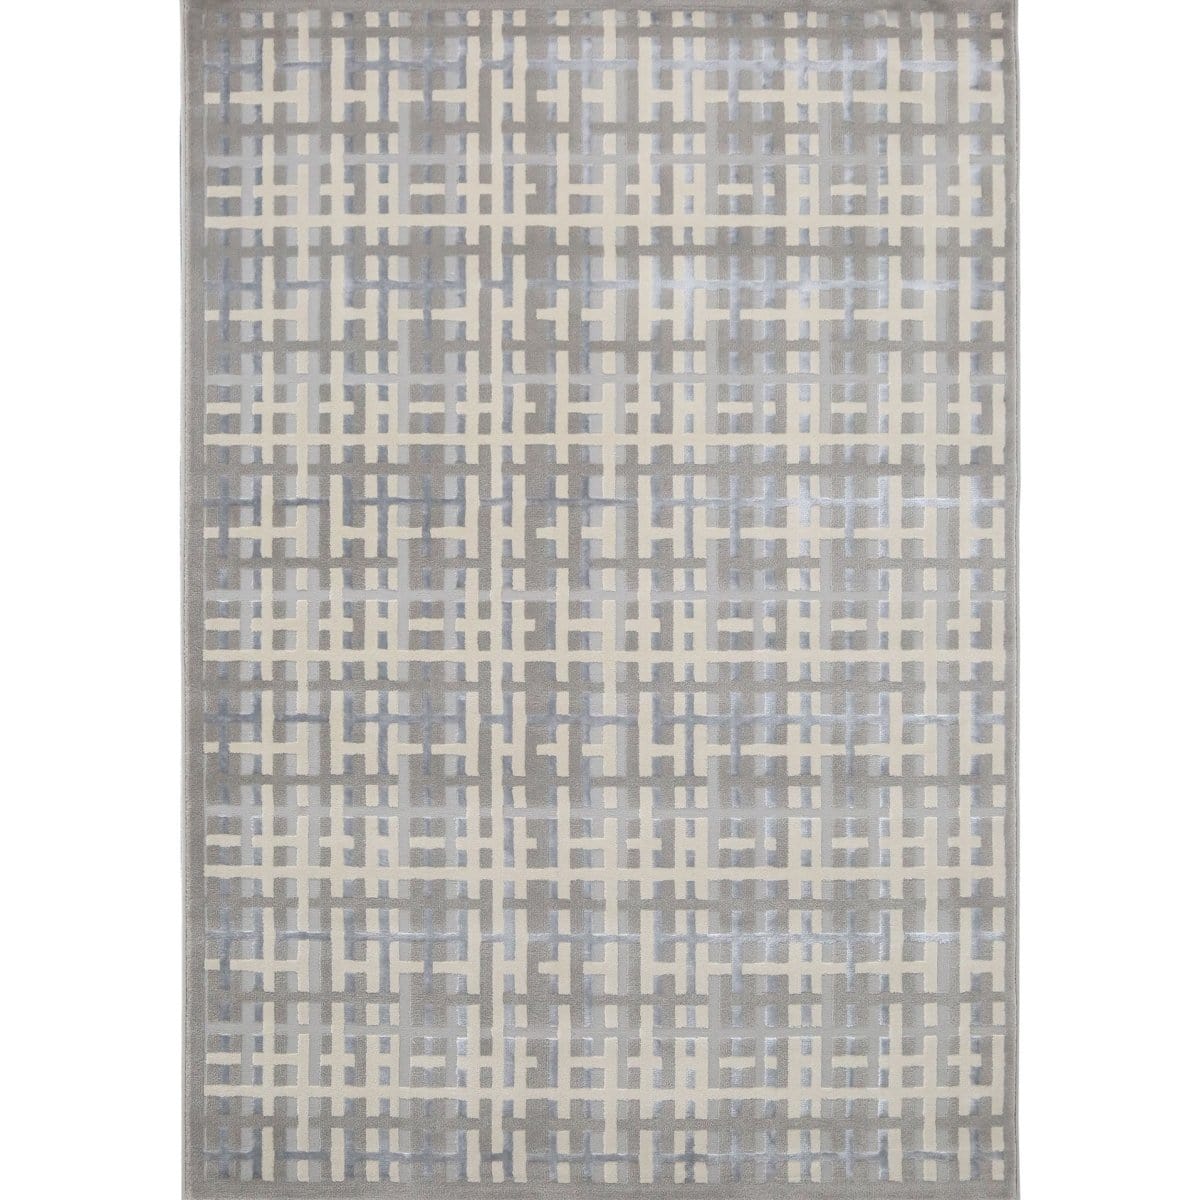 New York Carpet Collection (160*230cm) picket and rail